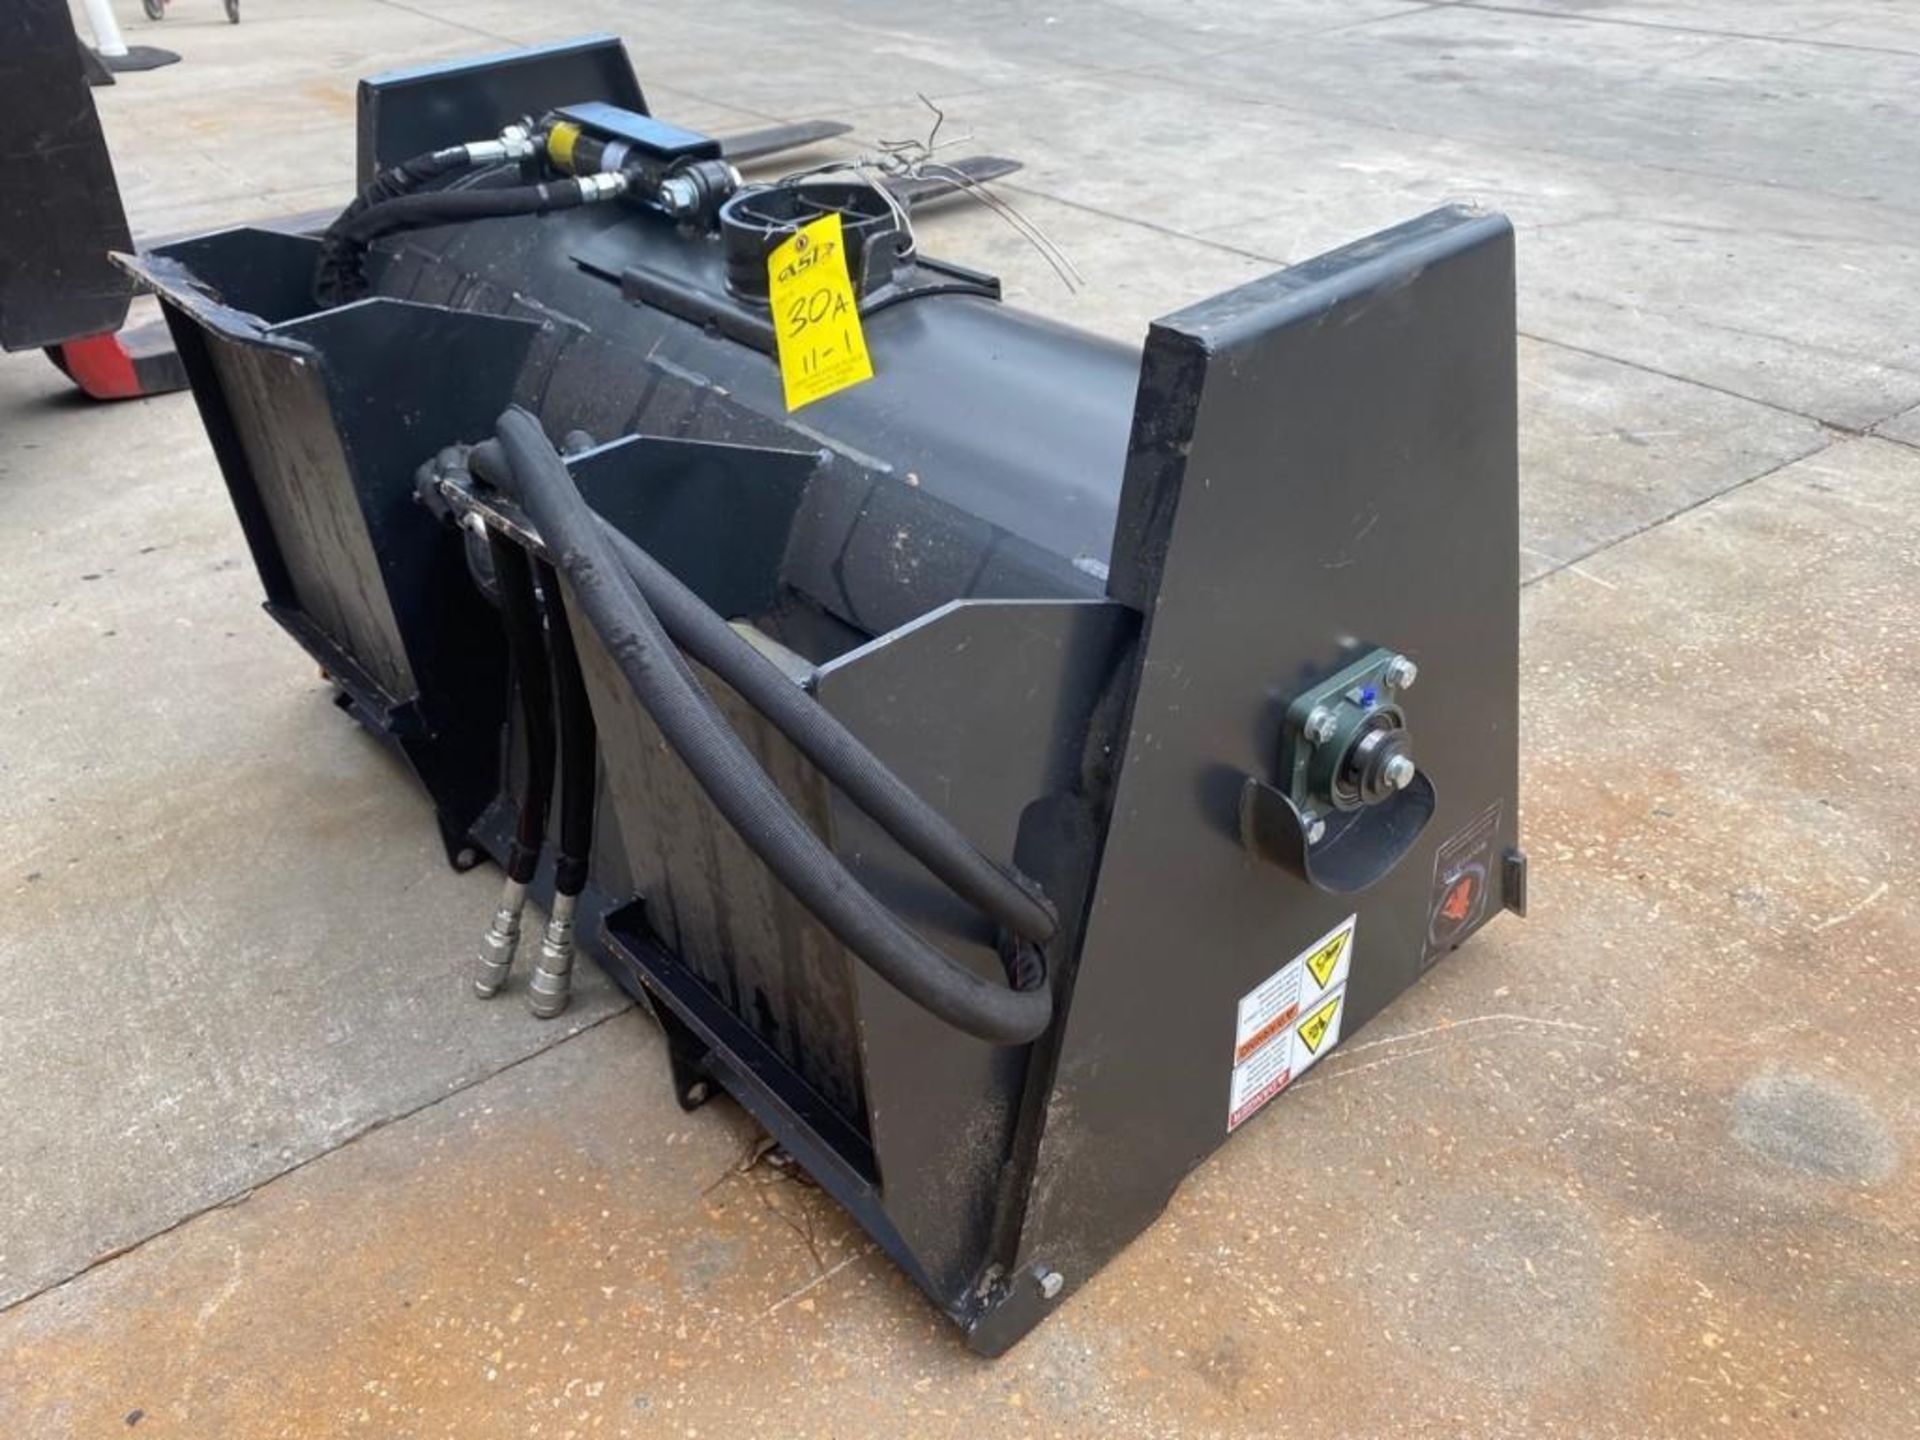 UNUSED 2020 WOLVERINE CEMENT MIXING ATTACHMENT FOR SKID STEER - Image 4 of 5